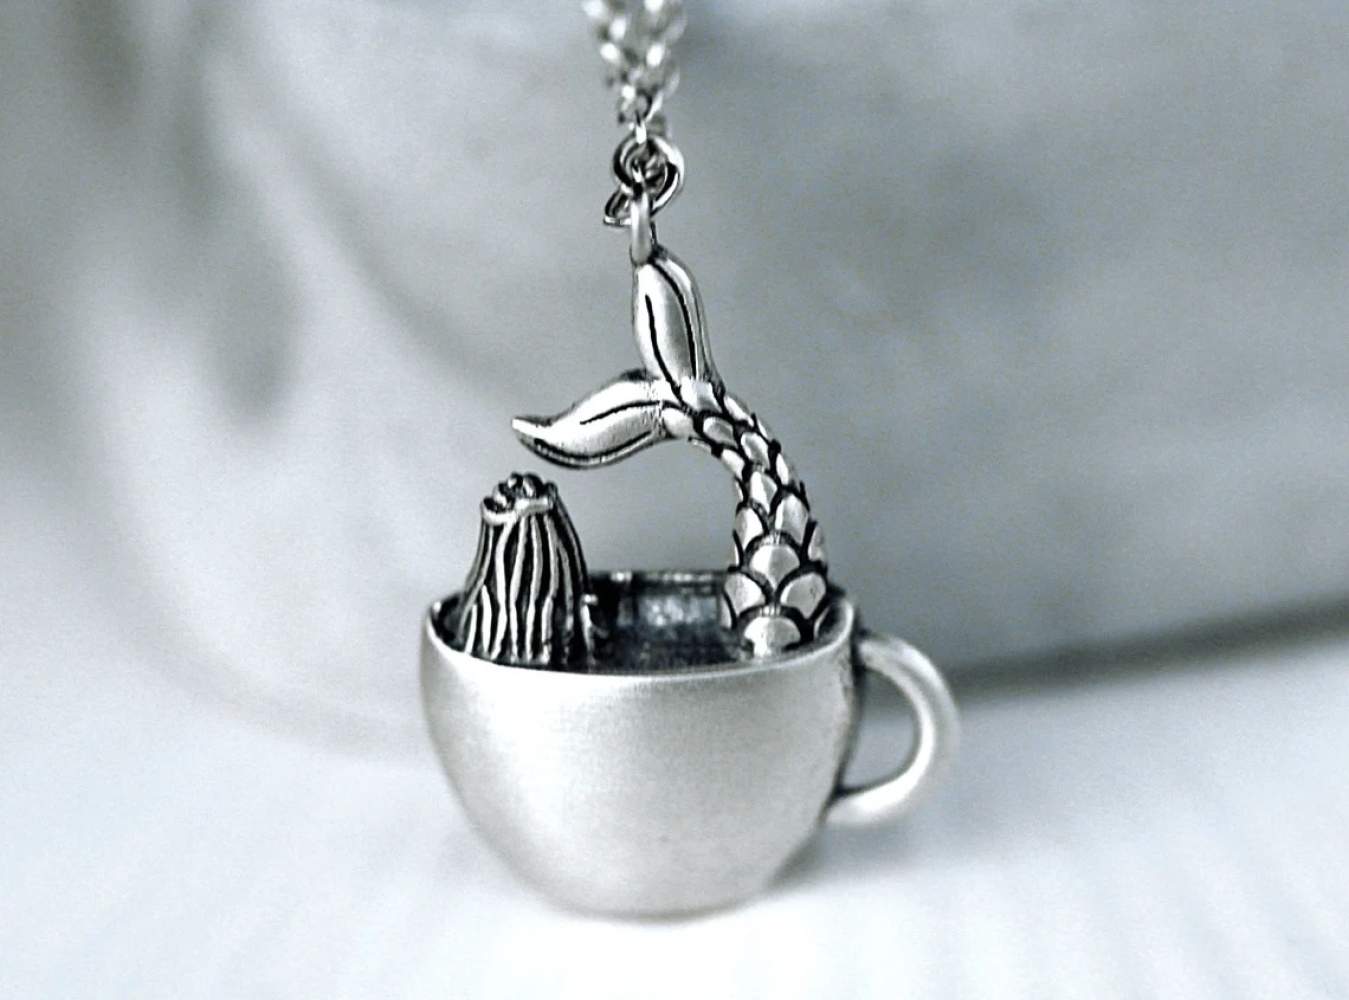 Mermaid in coffee cup necklace. Unique sterling silver pendant necklace